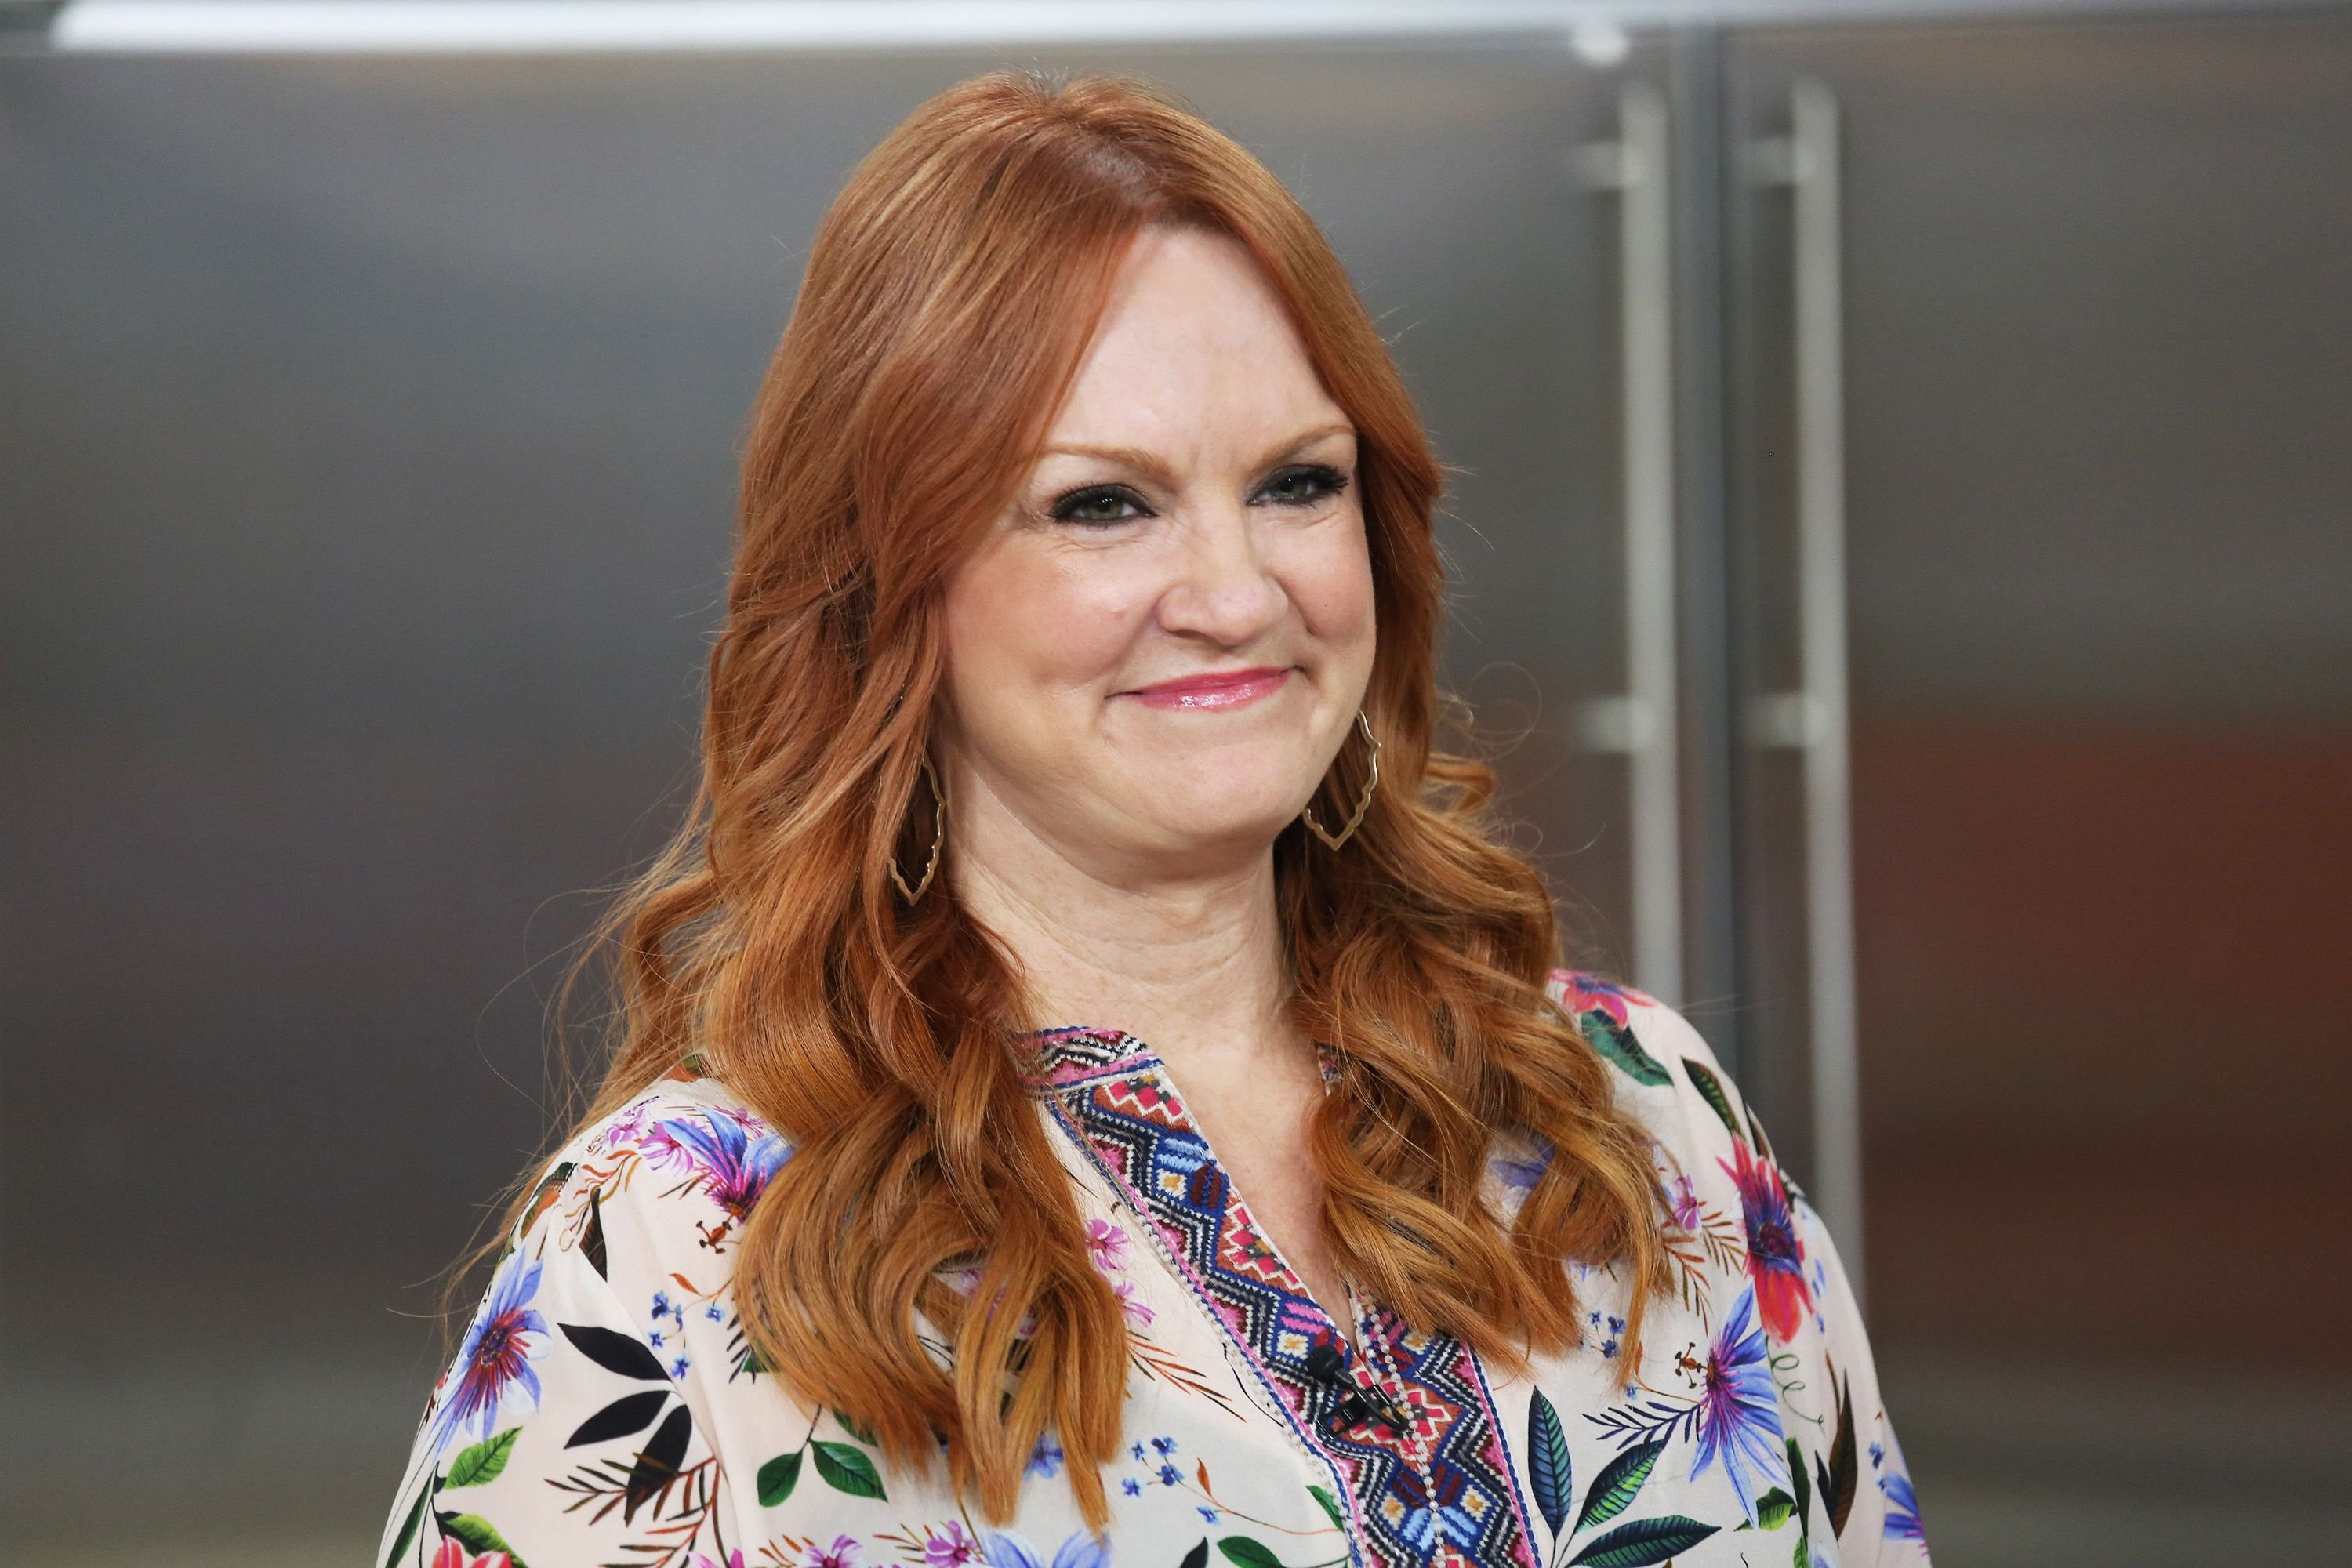 Ree Drummond at NBC Studio on Tuesday October 22, 2019 | Photo: Getty Images